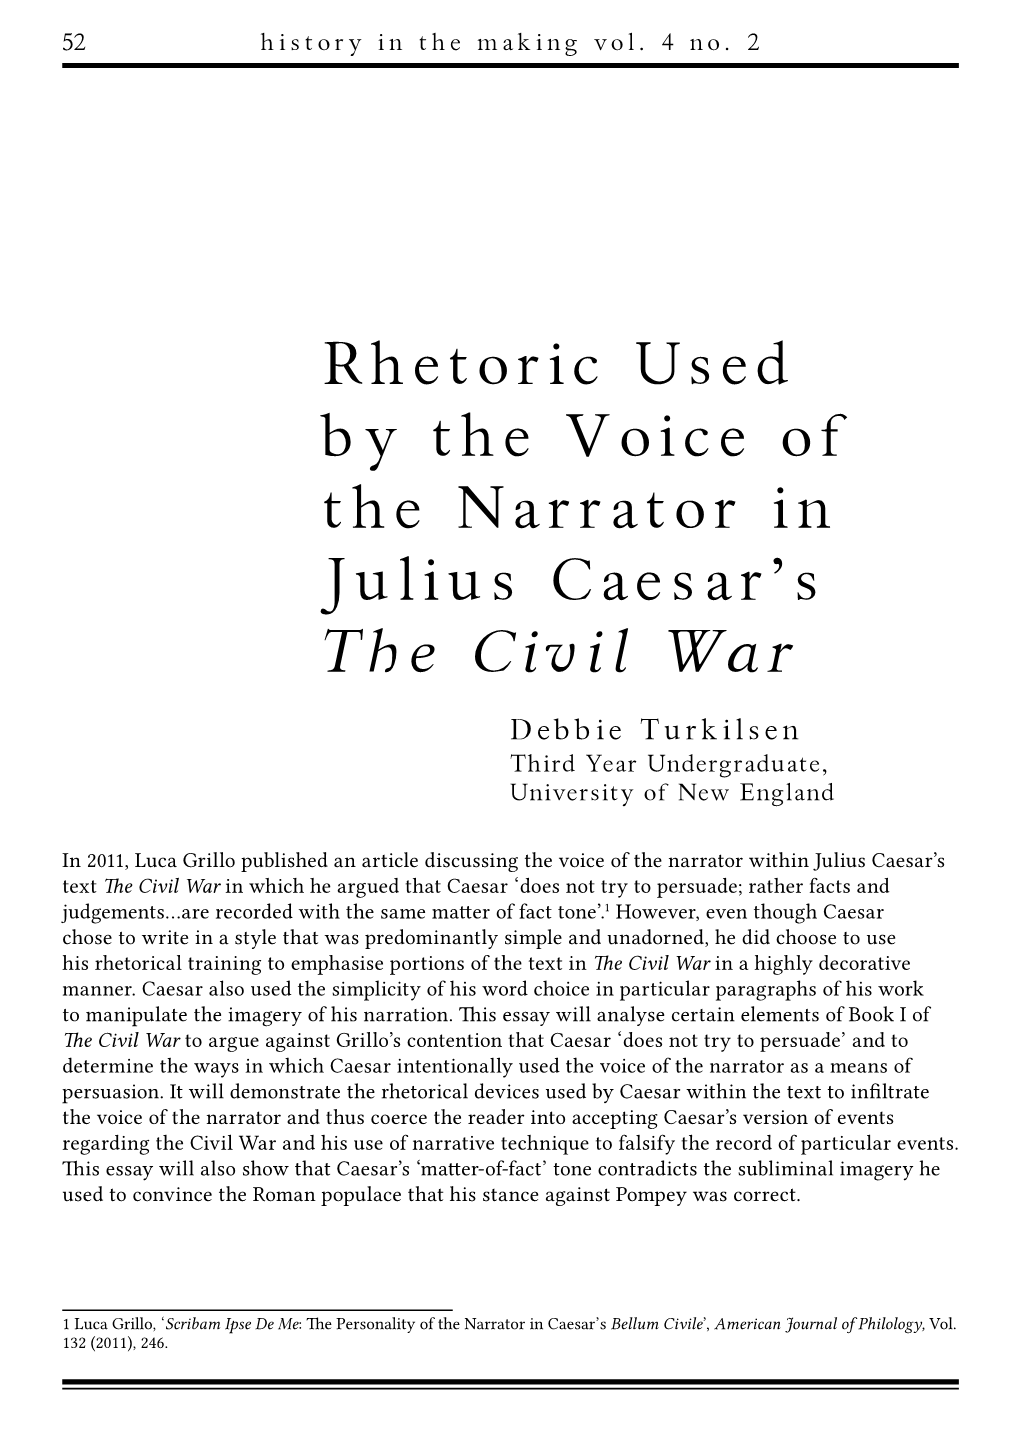 Rhetoric Used by the Voice of the Narrator in Julius Caesar's the Civil